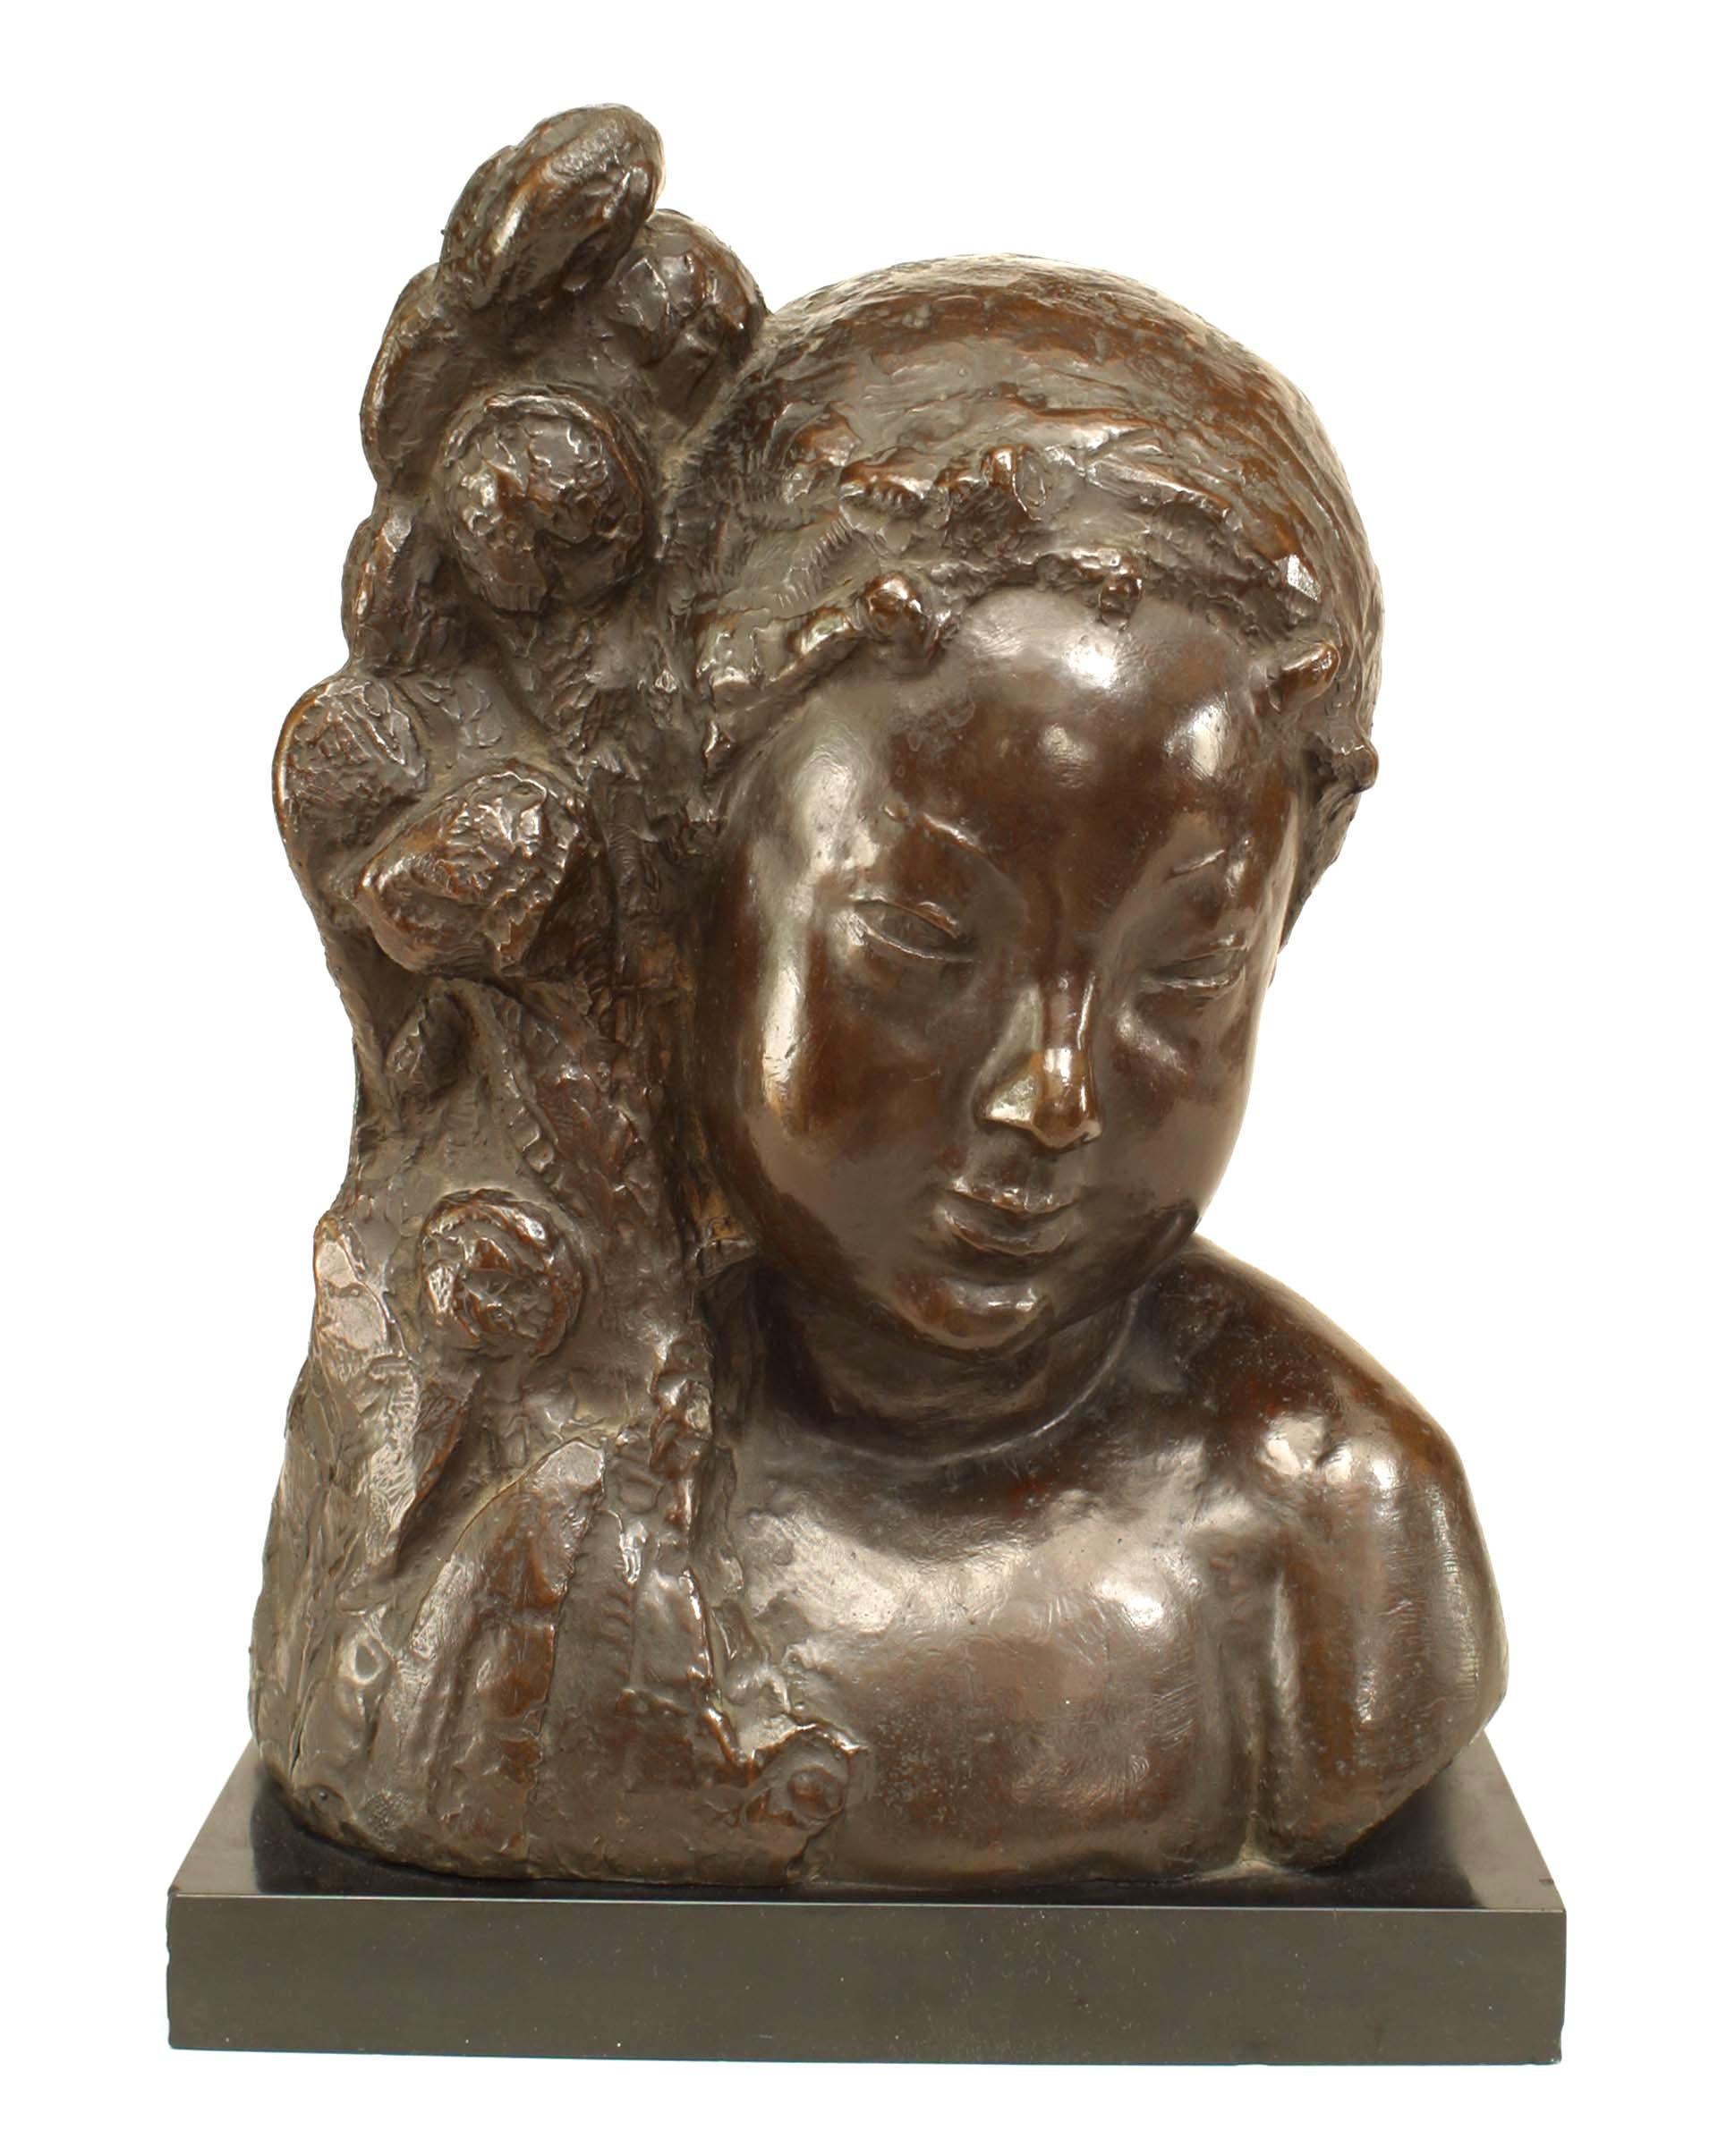 French Art Deco bronze bust of a nymph leaning by a floral arrangement on a black marble base (signed: N. ROY and marked J. LAMY FOUNDEUR, CHATILLION, SEINE)
